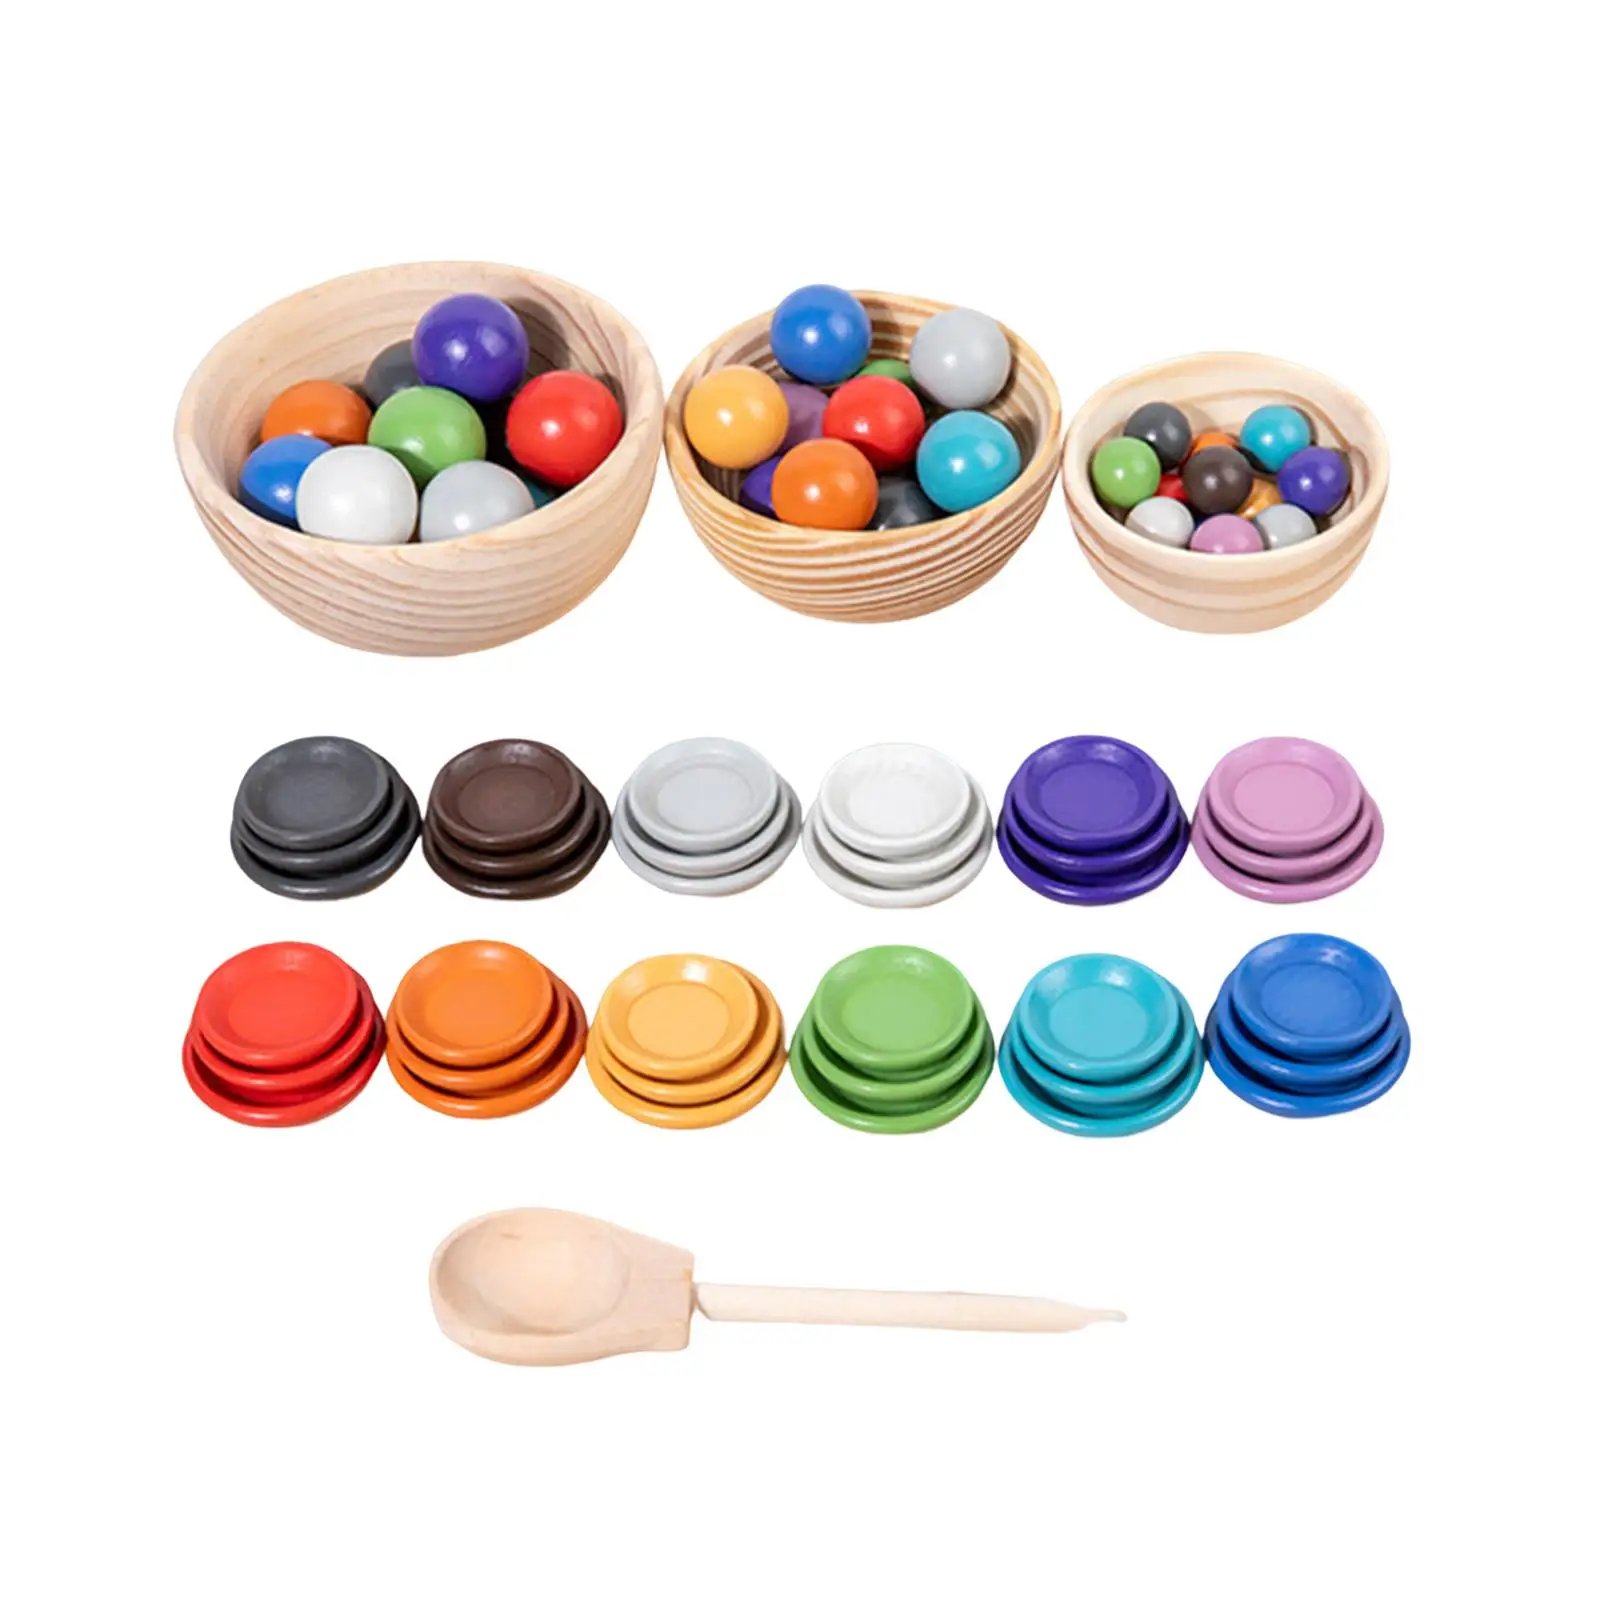 Rainbow Balls on Plates Montessori Toy Sorter Game Early Education Toys Preschool Learning Material, Educational Counting Toy